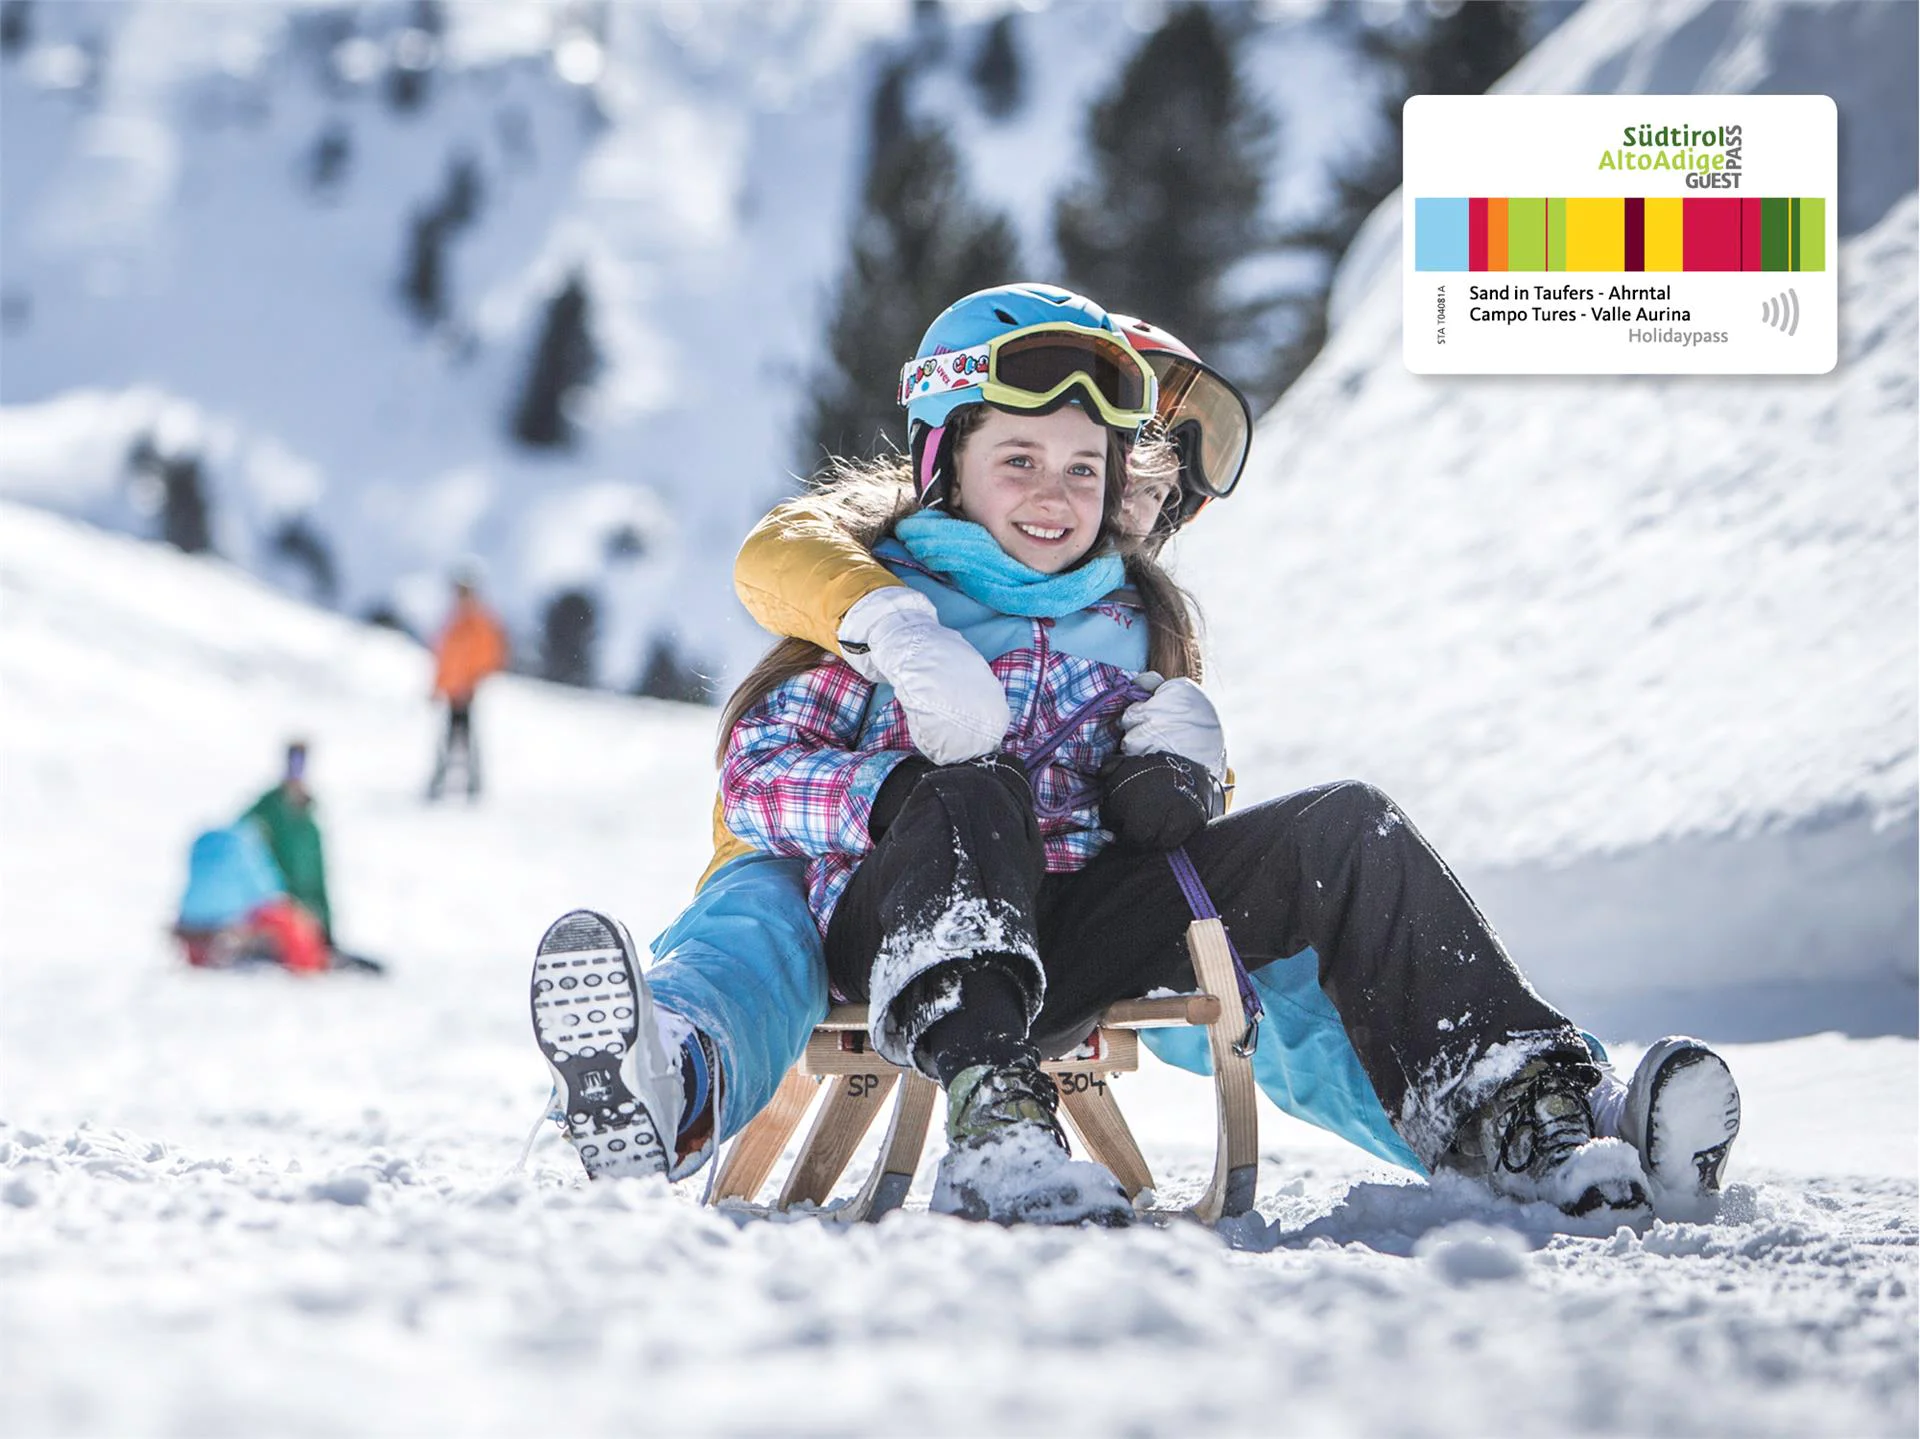 SPEIKBODEN | With a sledding guide to Luttach - 10km long Sand in Taufers/Campo Tures 1 suedtirol.info